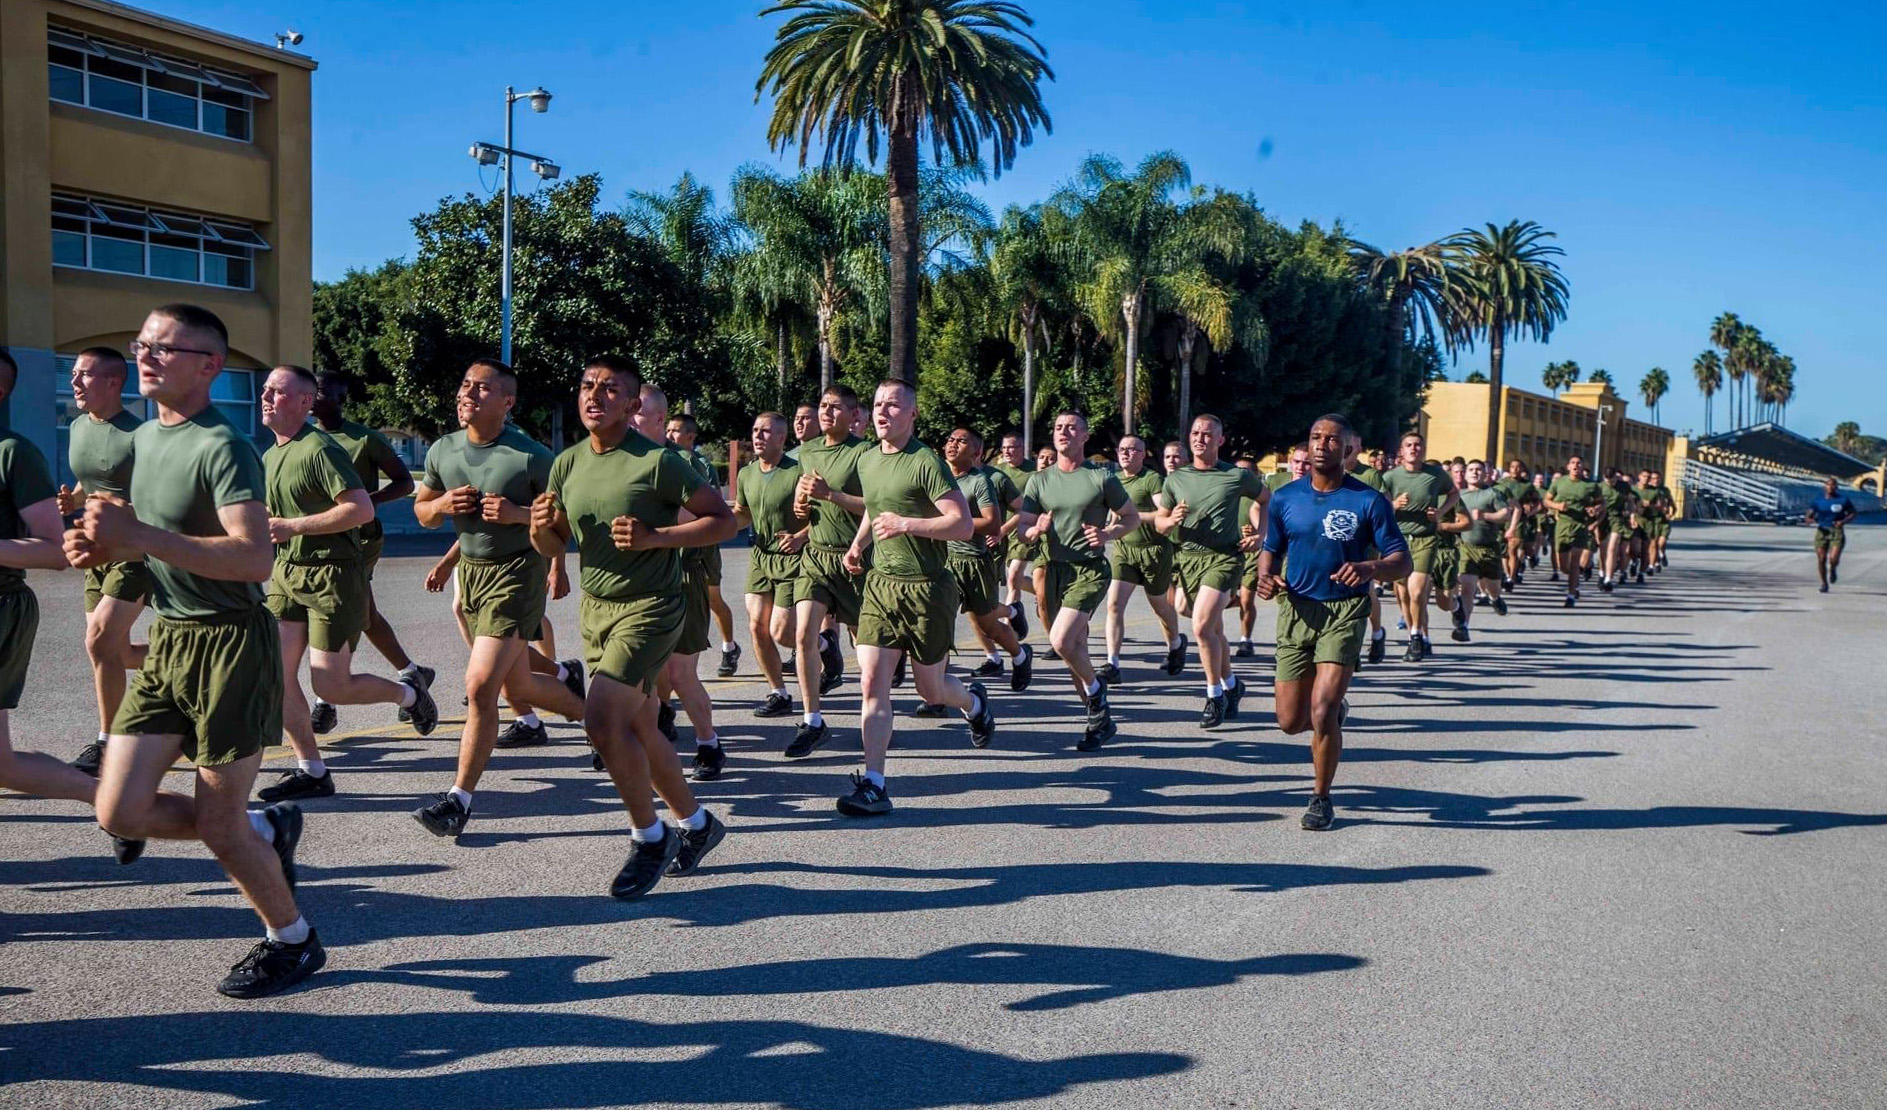 New Marines With Lima Company 3rd Recruit Training Battalion Participate In A Motivational Run At Marine Corps Recruit Depot San Diego Jan 21 21